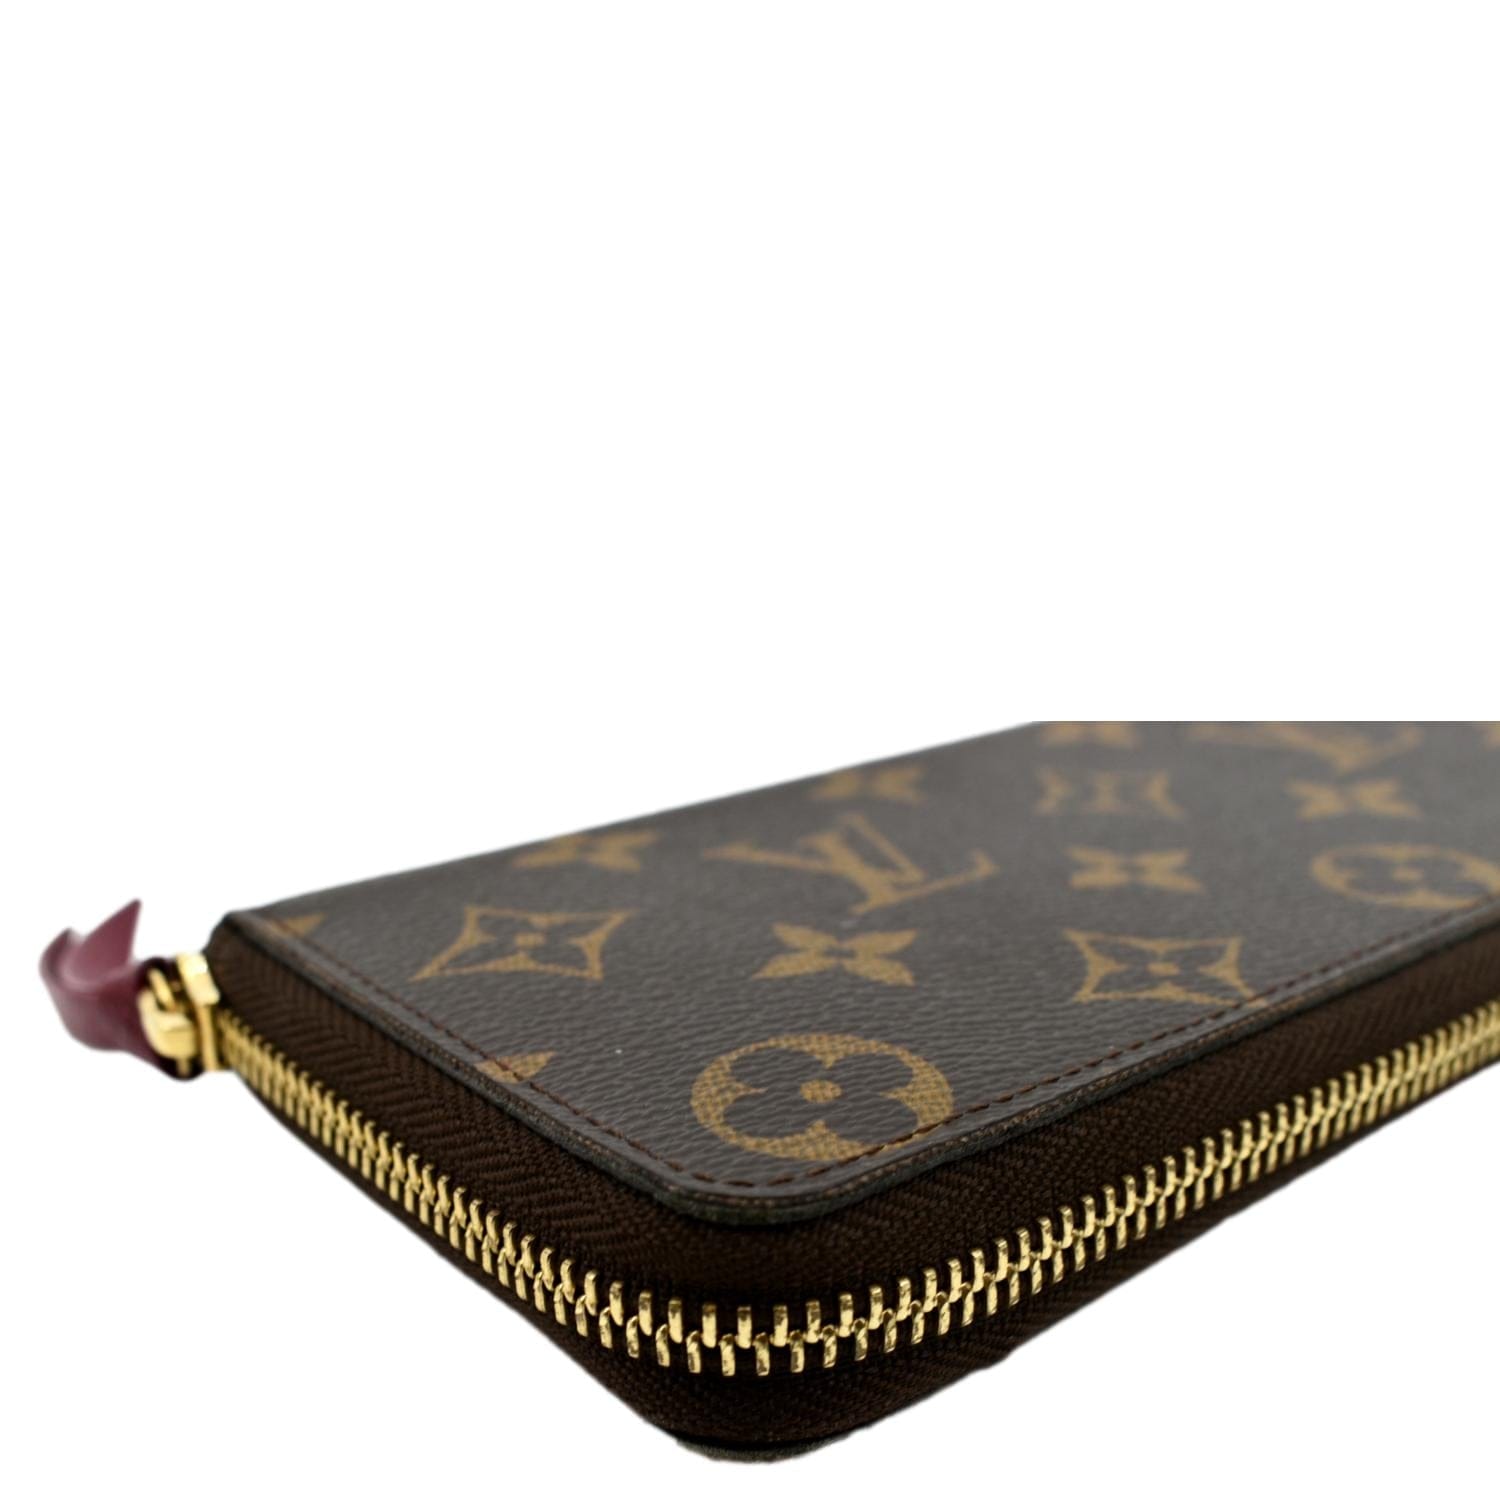 100% Authentic Louis Vuitton Small Monogram Zip Wallet Made In